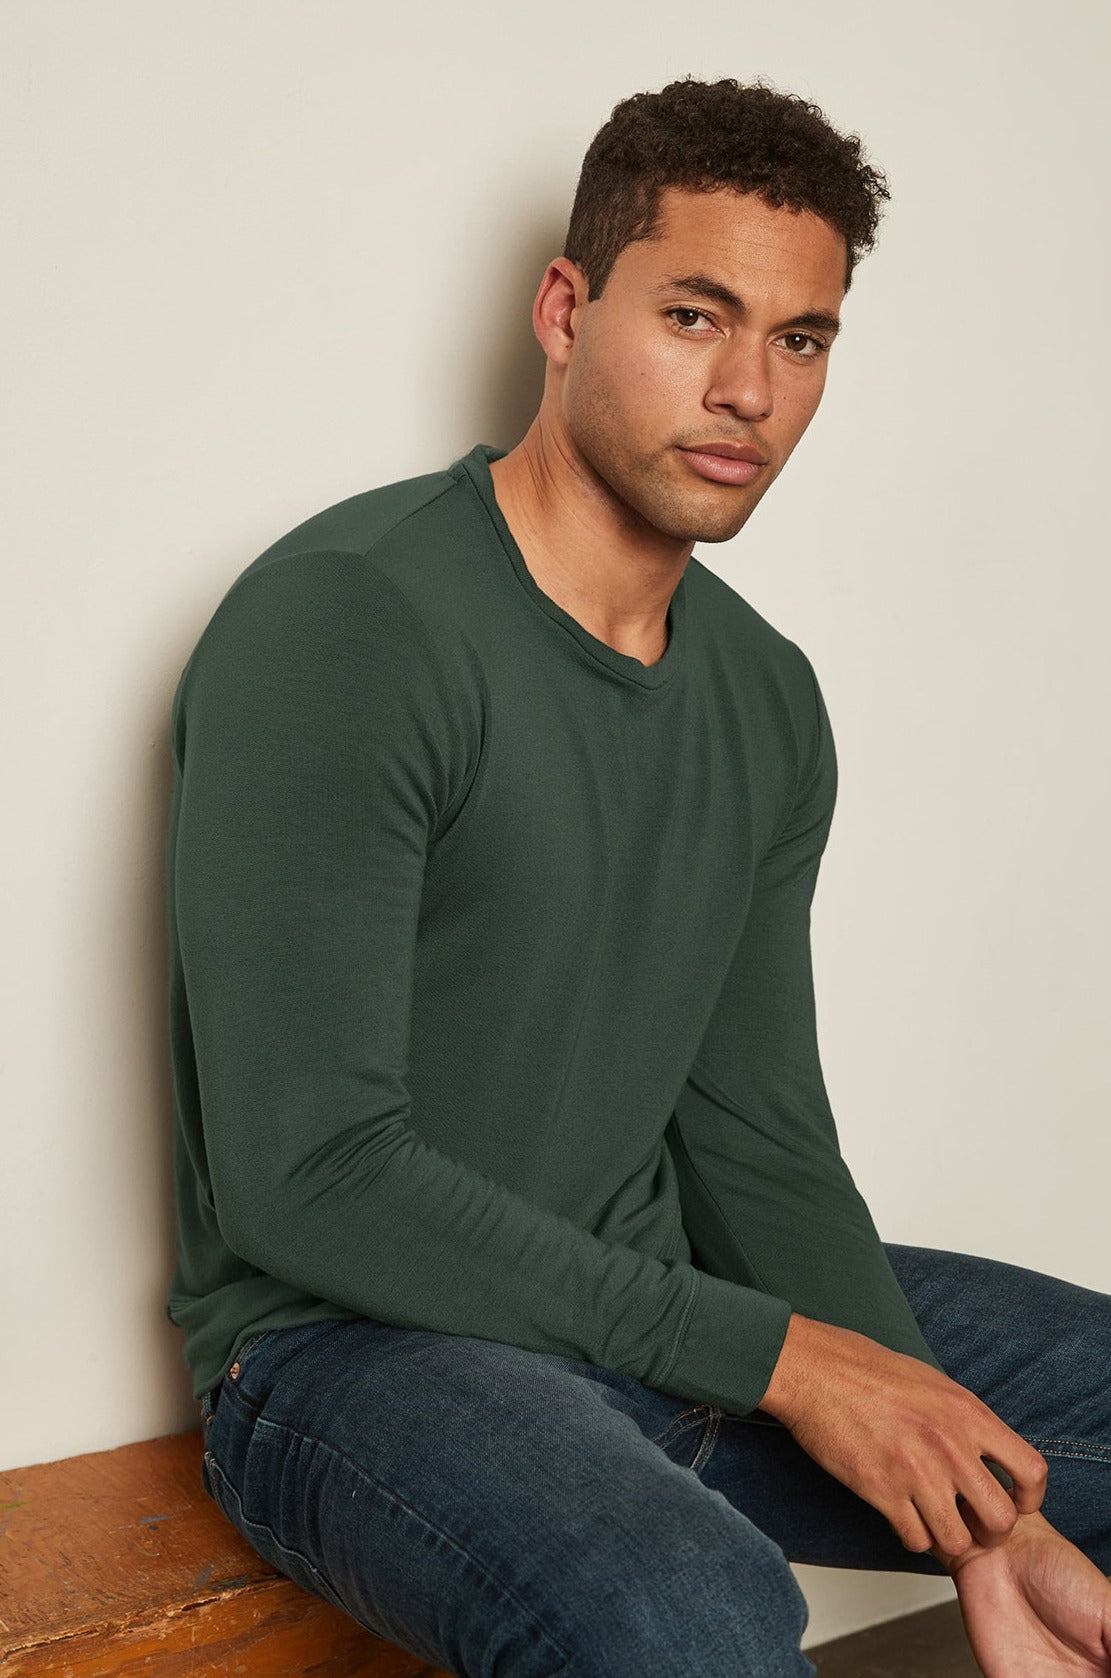 A man wearing a cozy green long-sleeved SOREN LUXE FLEECE PULLOVER made by Velvet by Graham & Spencer and stretch jeans.-26632269955265